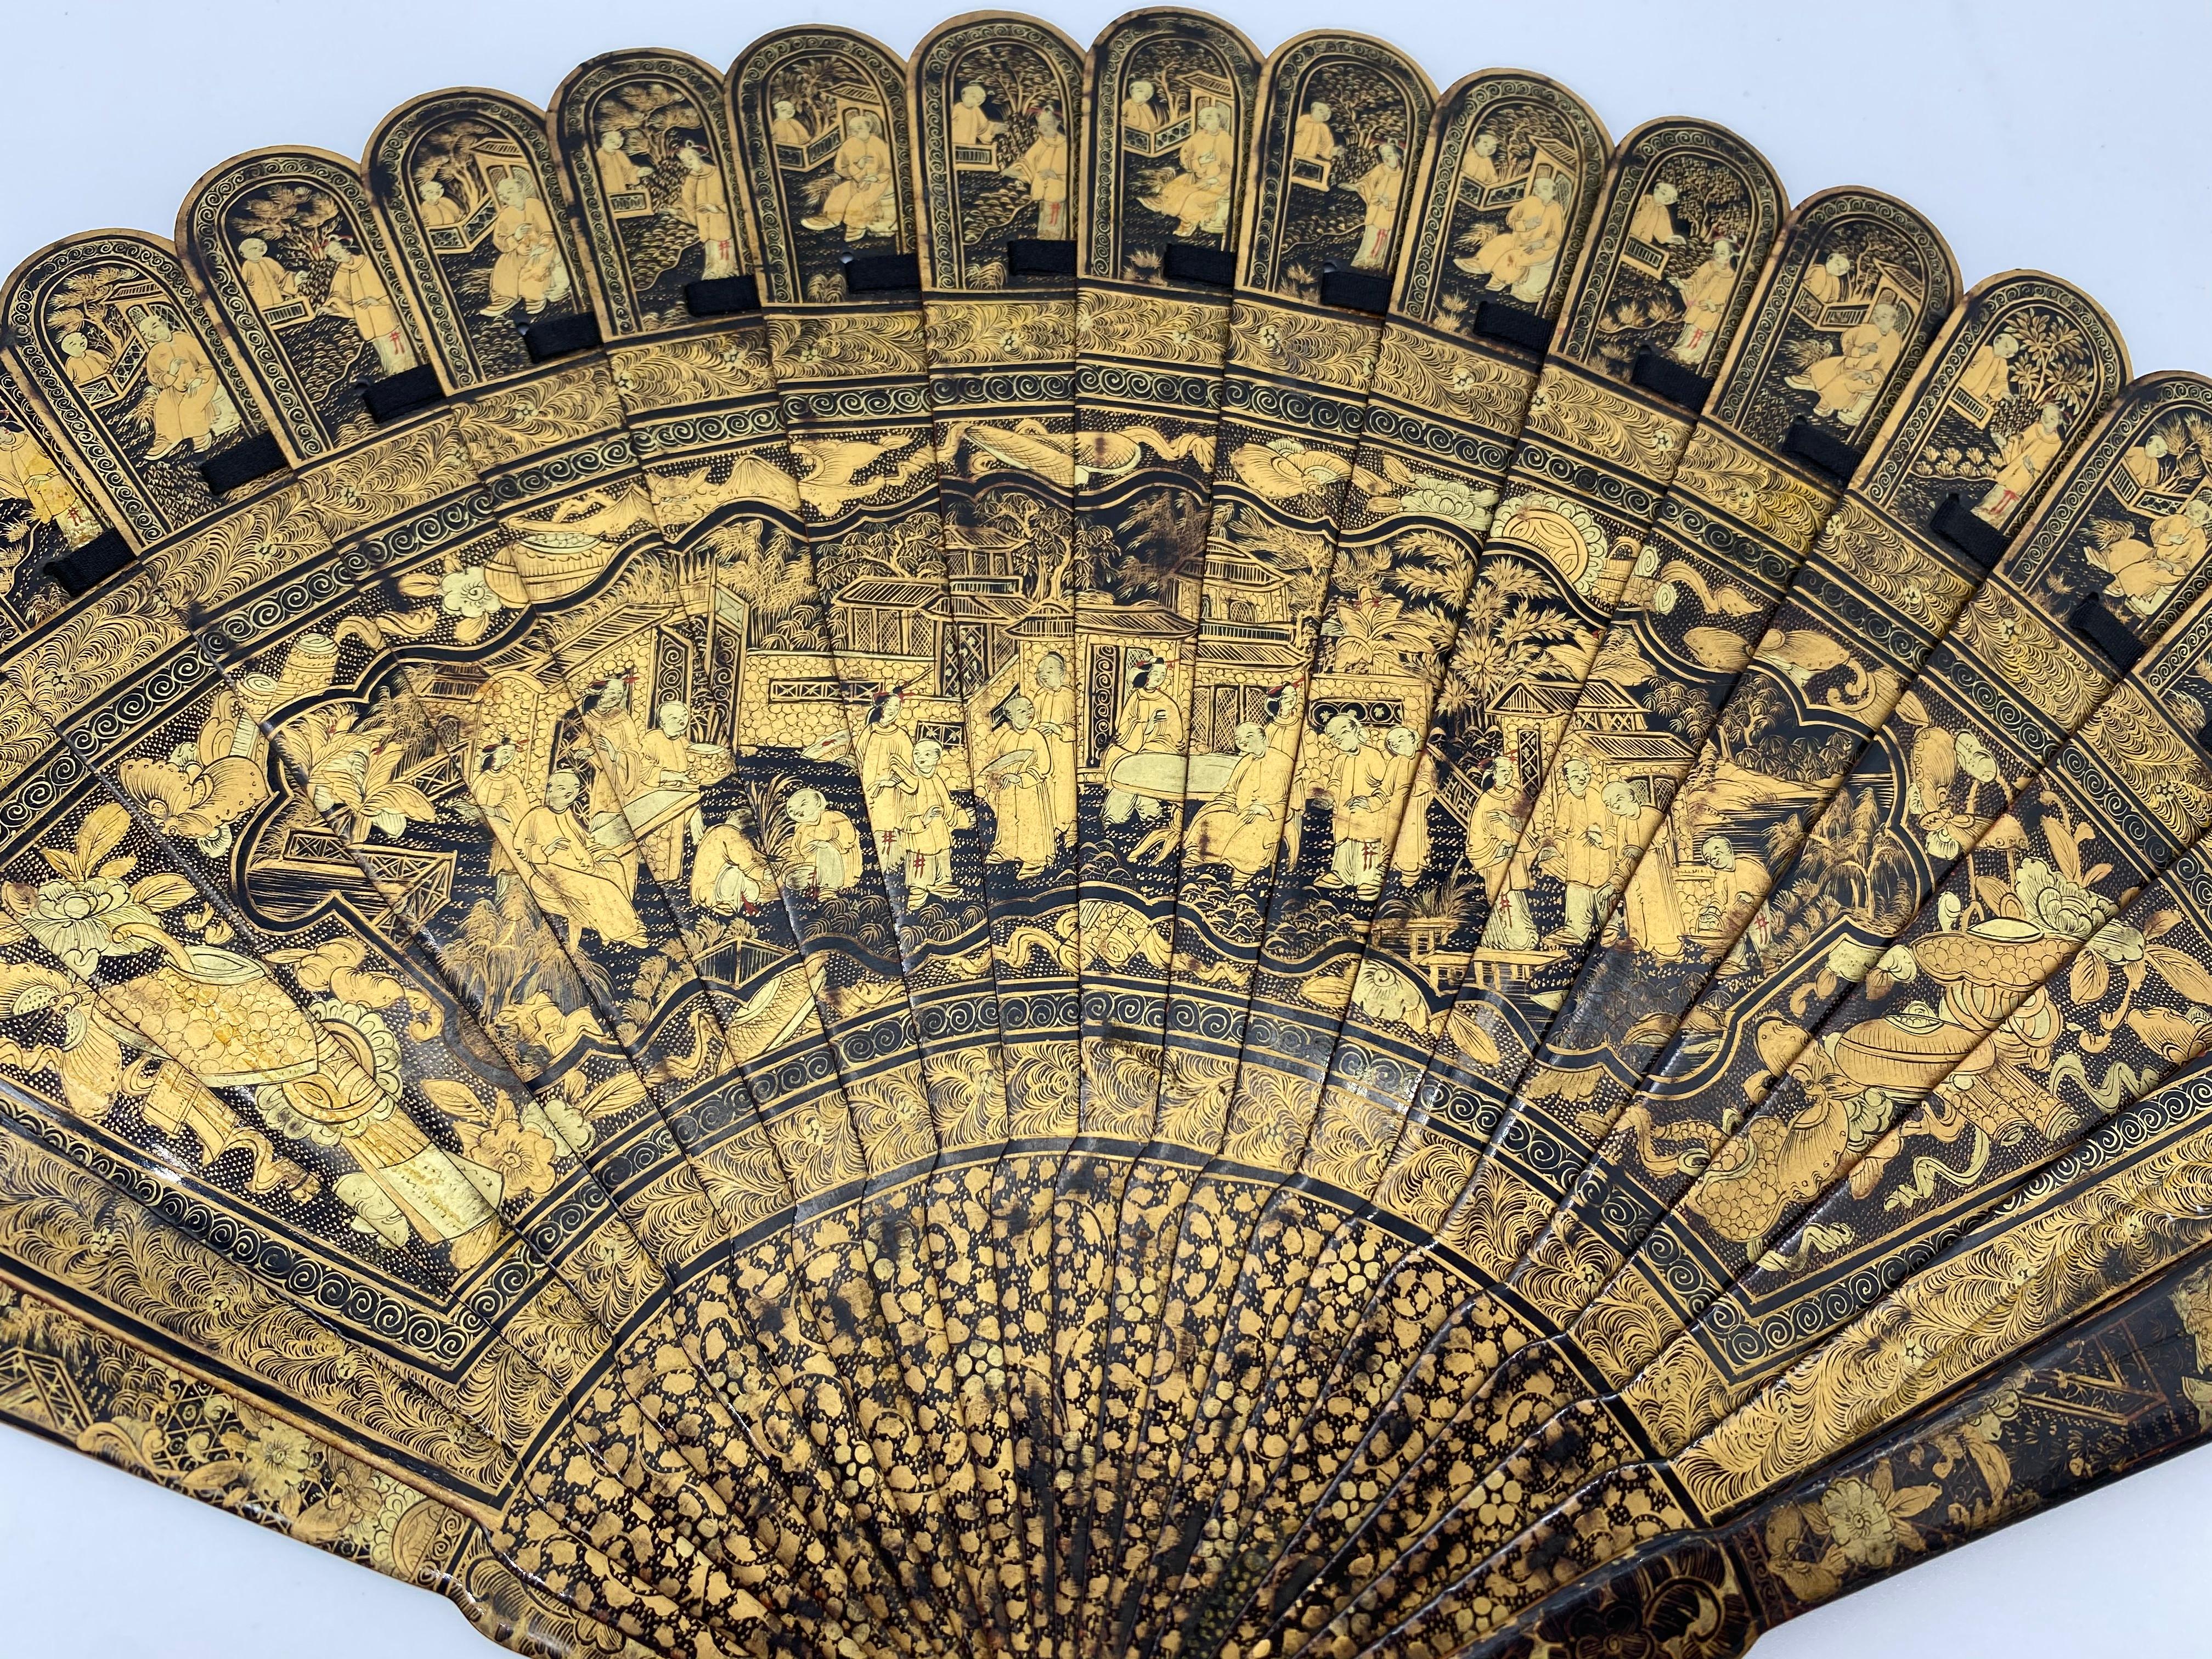 Mid-19th Century Antique Chinese Hand Painted Lacquer Scene Gilt Fan with Lacquer Box For Sale